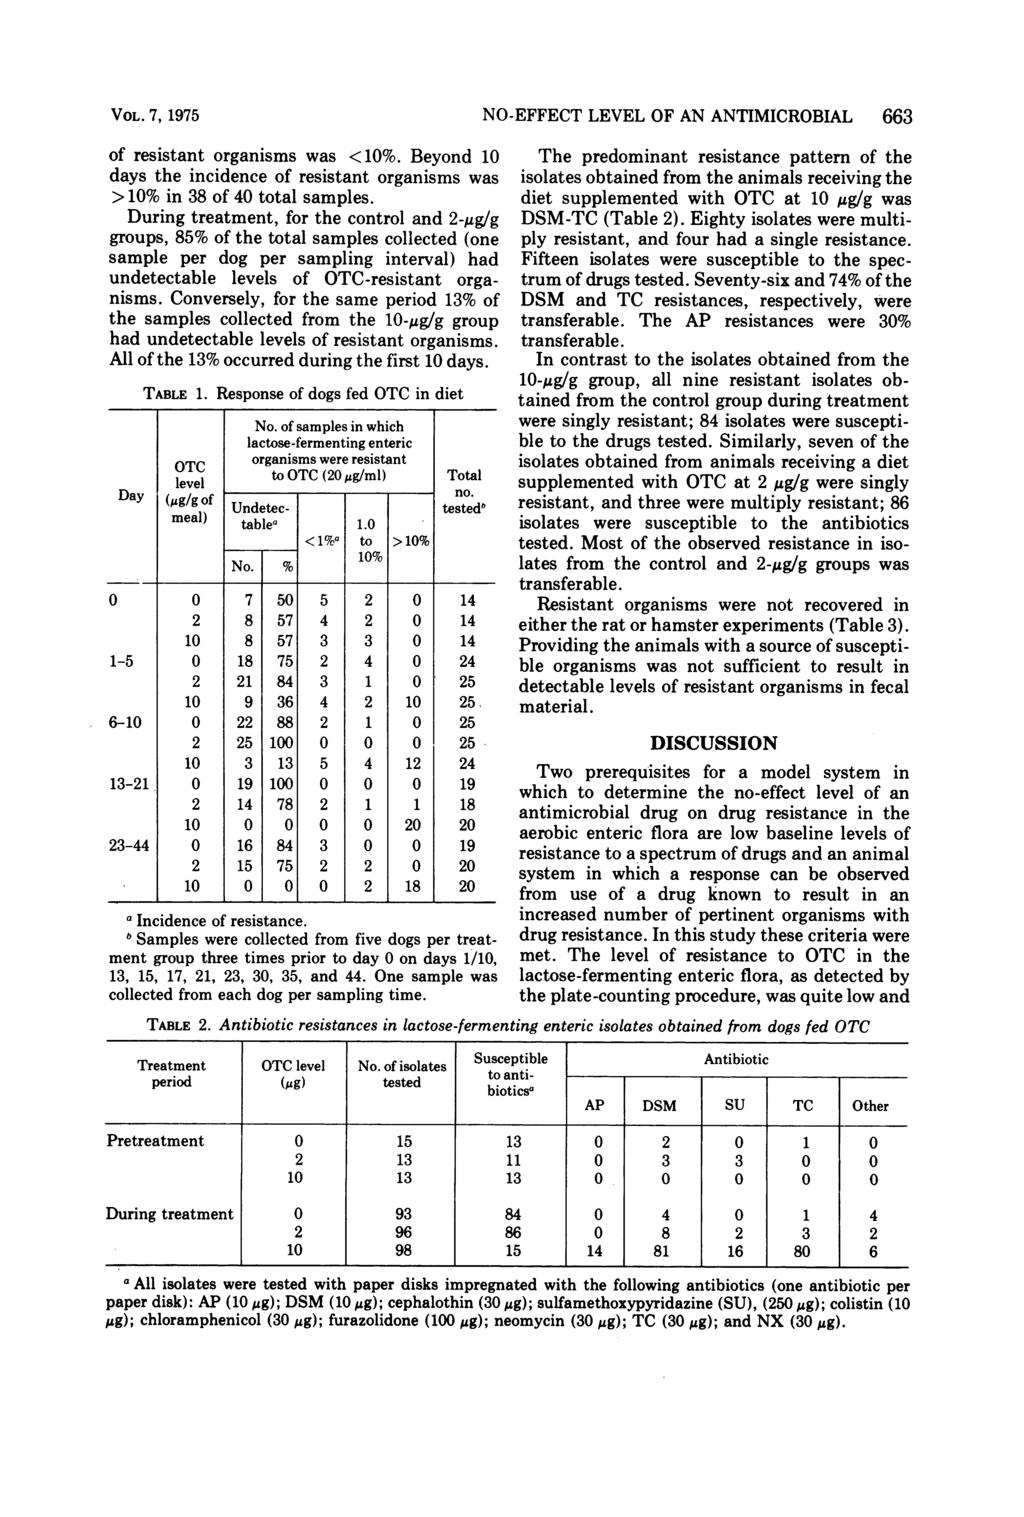 VOL. 7, 1975 of resistant organisms was <10%. Beyond 10 days the incidence of resistant organisms was > 10% in 38 of 40 total samples.